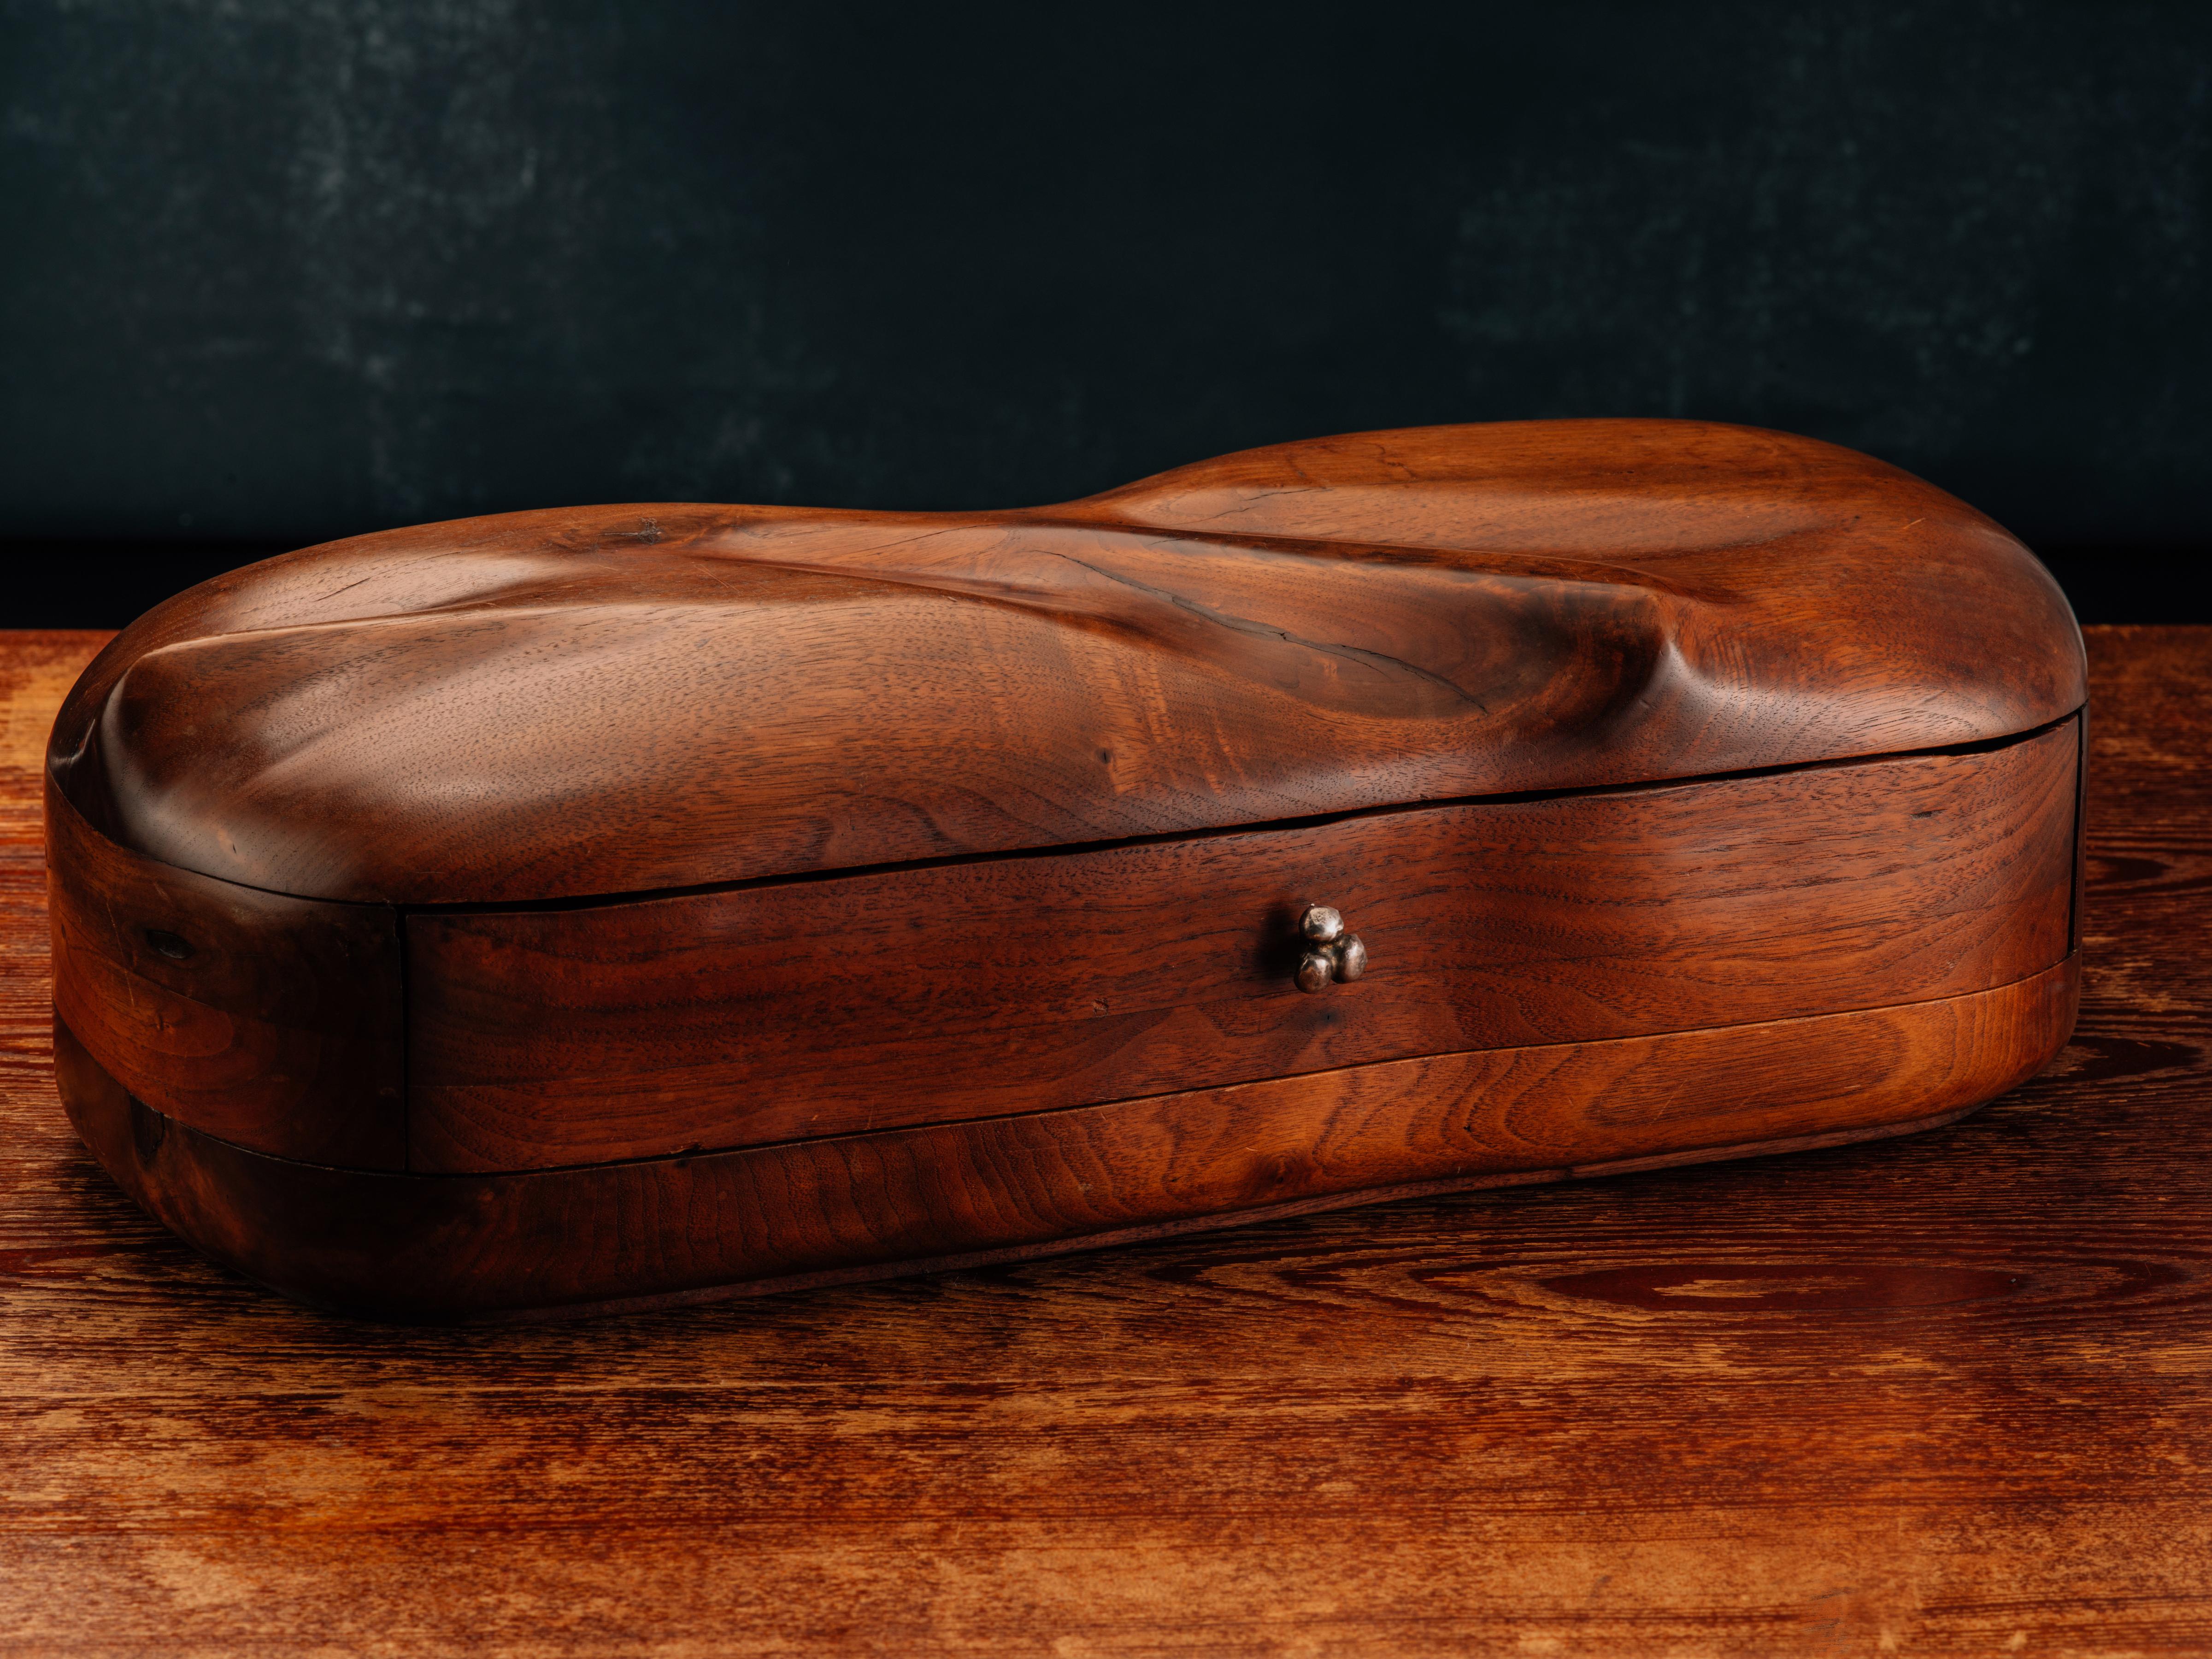 A modernist, walnut jewelry box in a near racetrack form comprising a laminated body, a sensuous, hand-sculpted lid, and a single drawer fitted with a forged metal pull, all raised upon a recessed, shallow foot (3/16